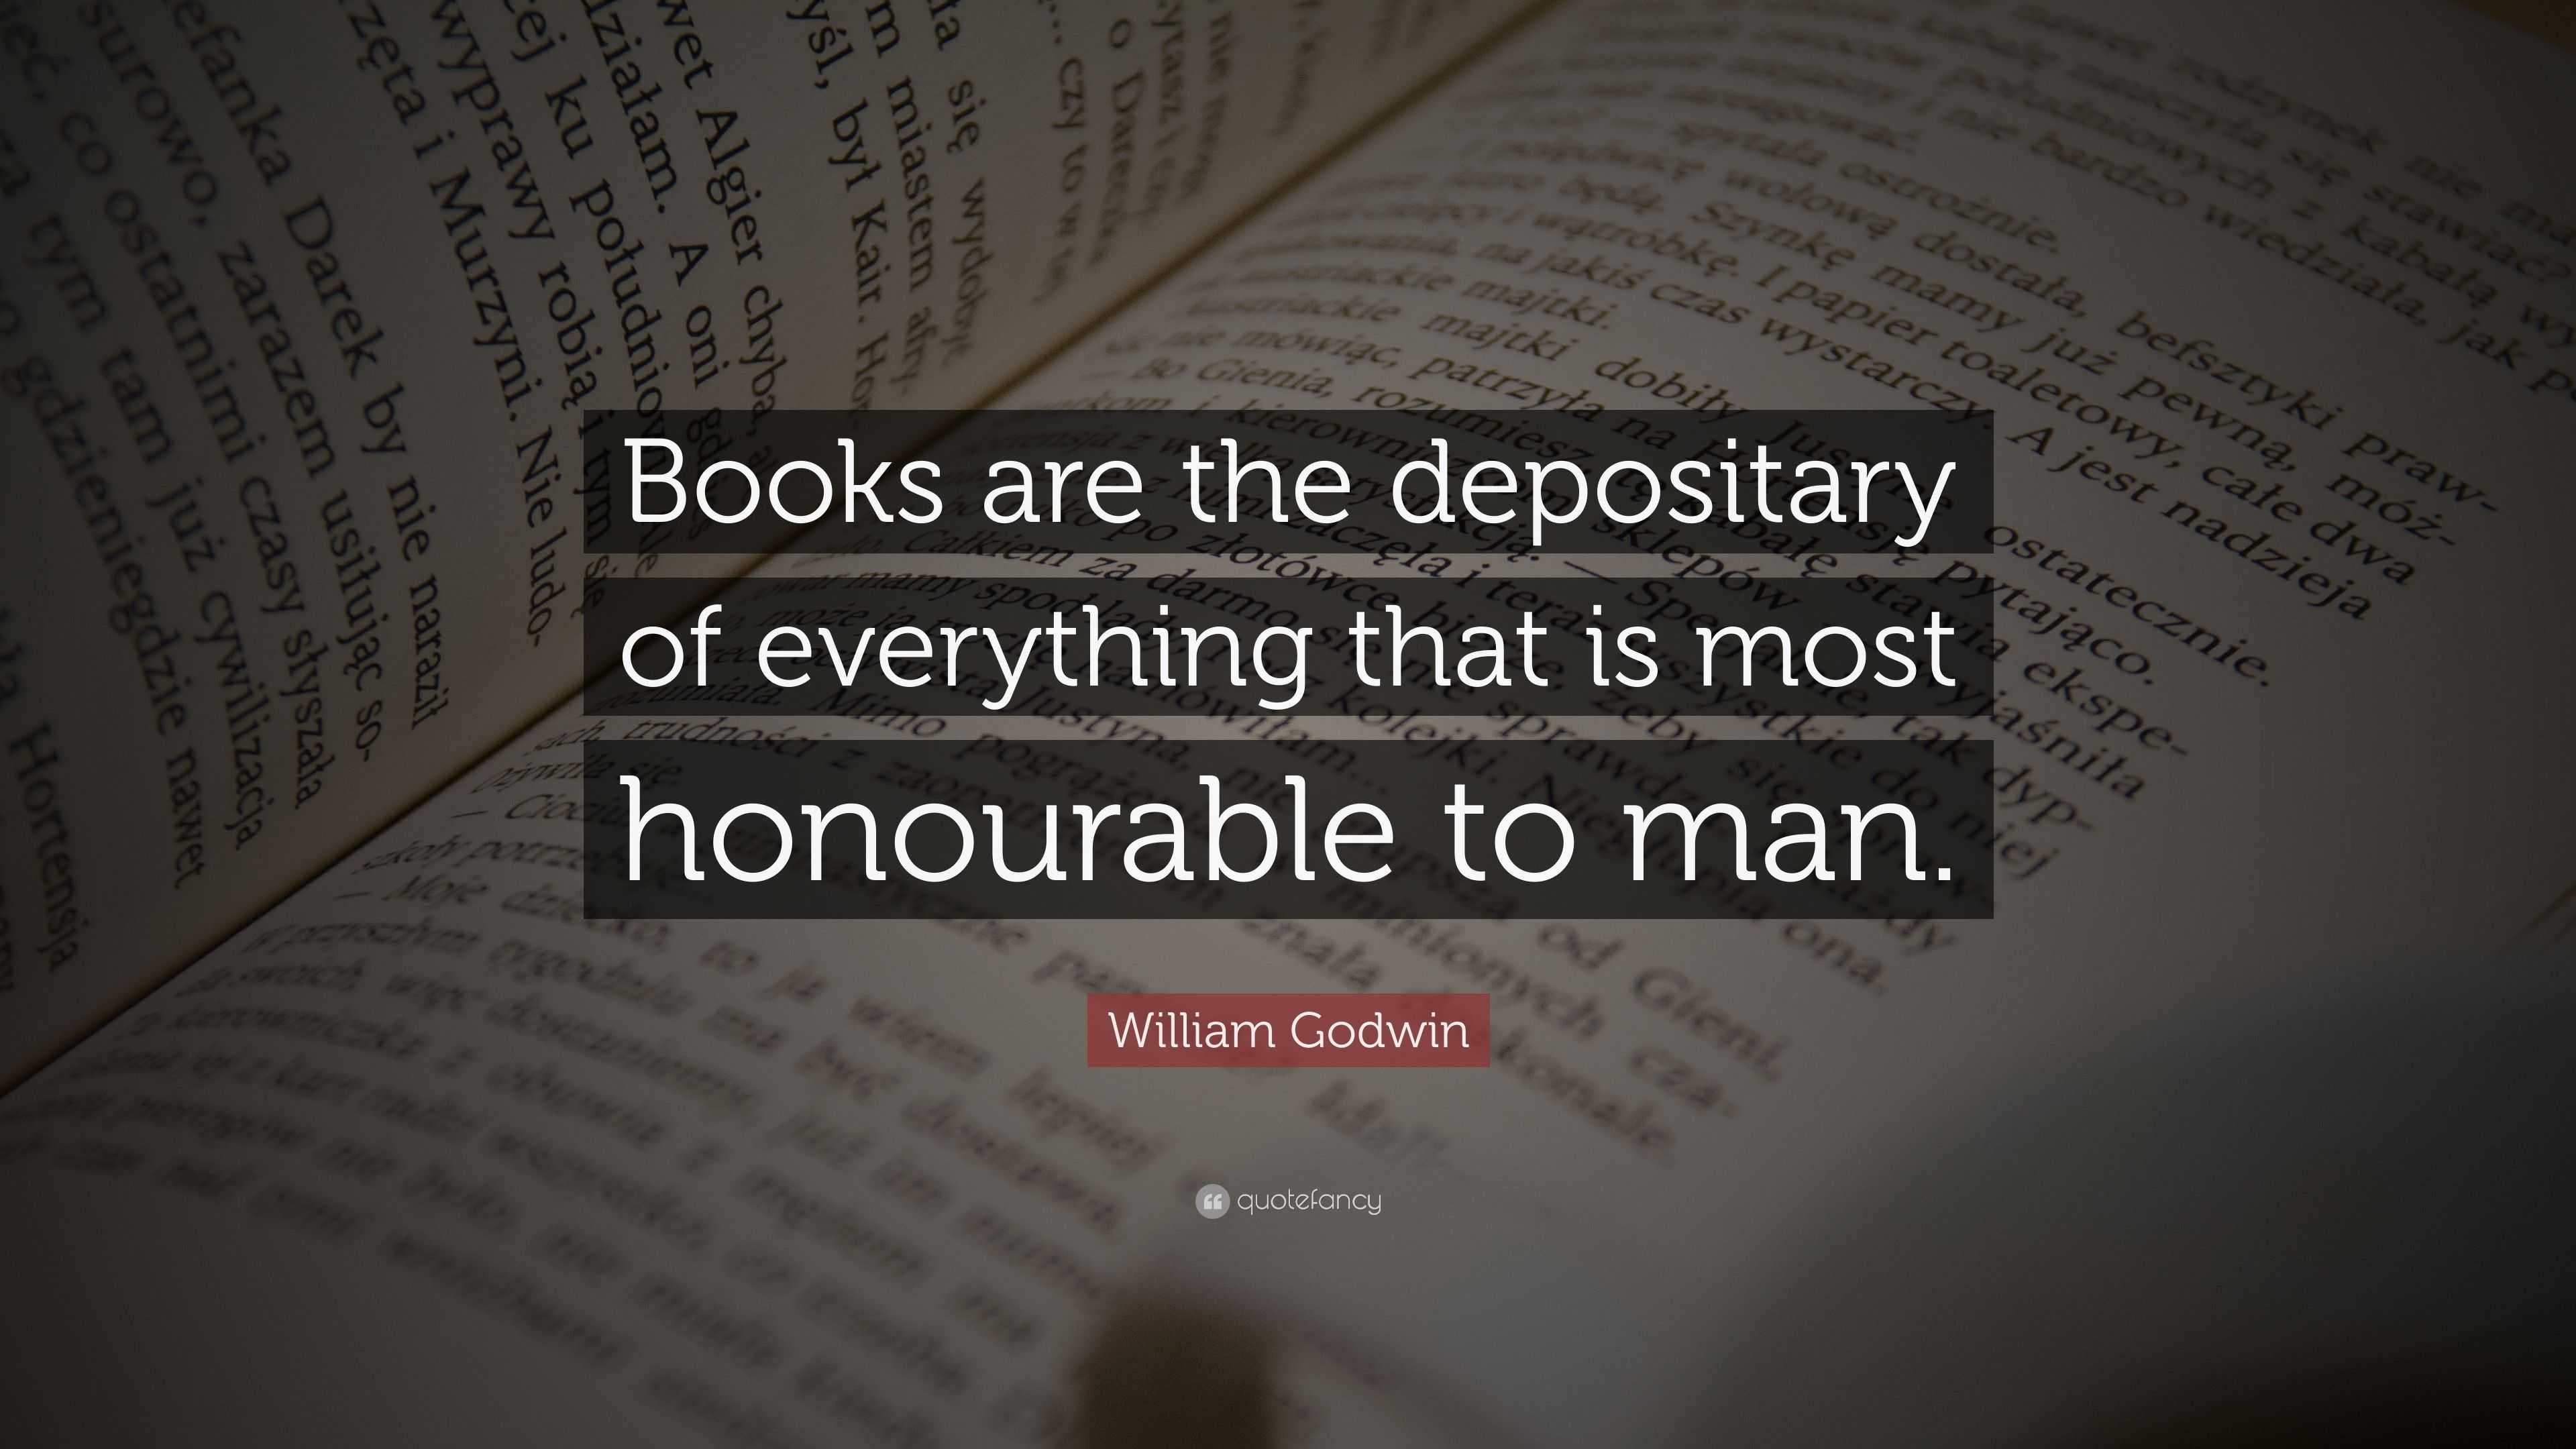 William Godwin Quote: “Books are the depositary of everything that is ...